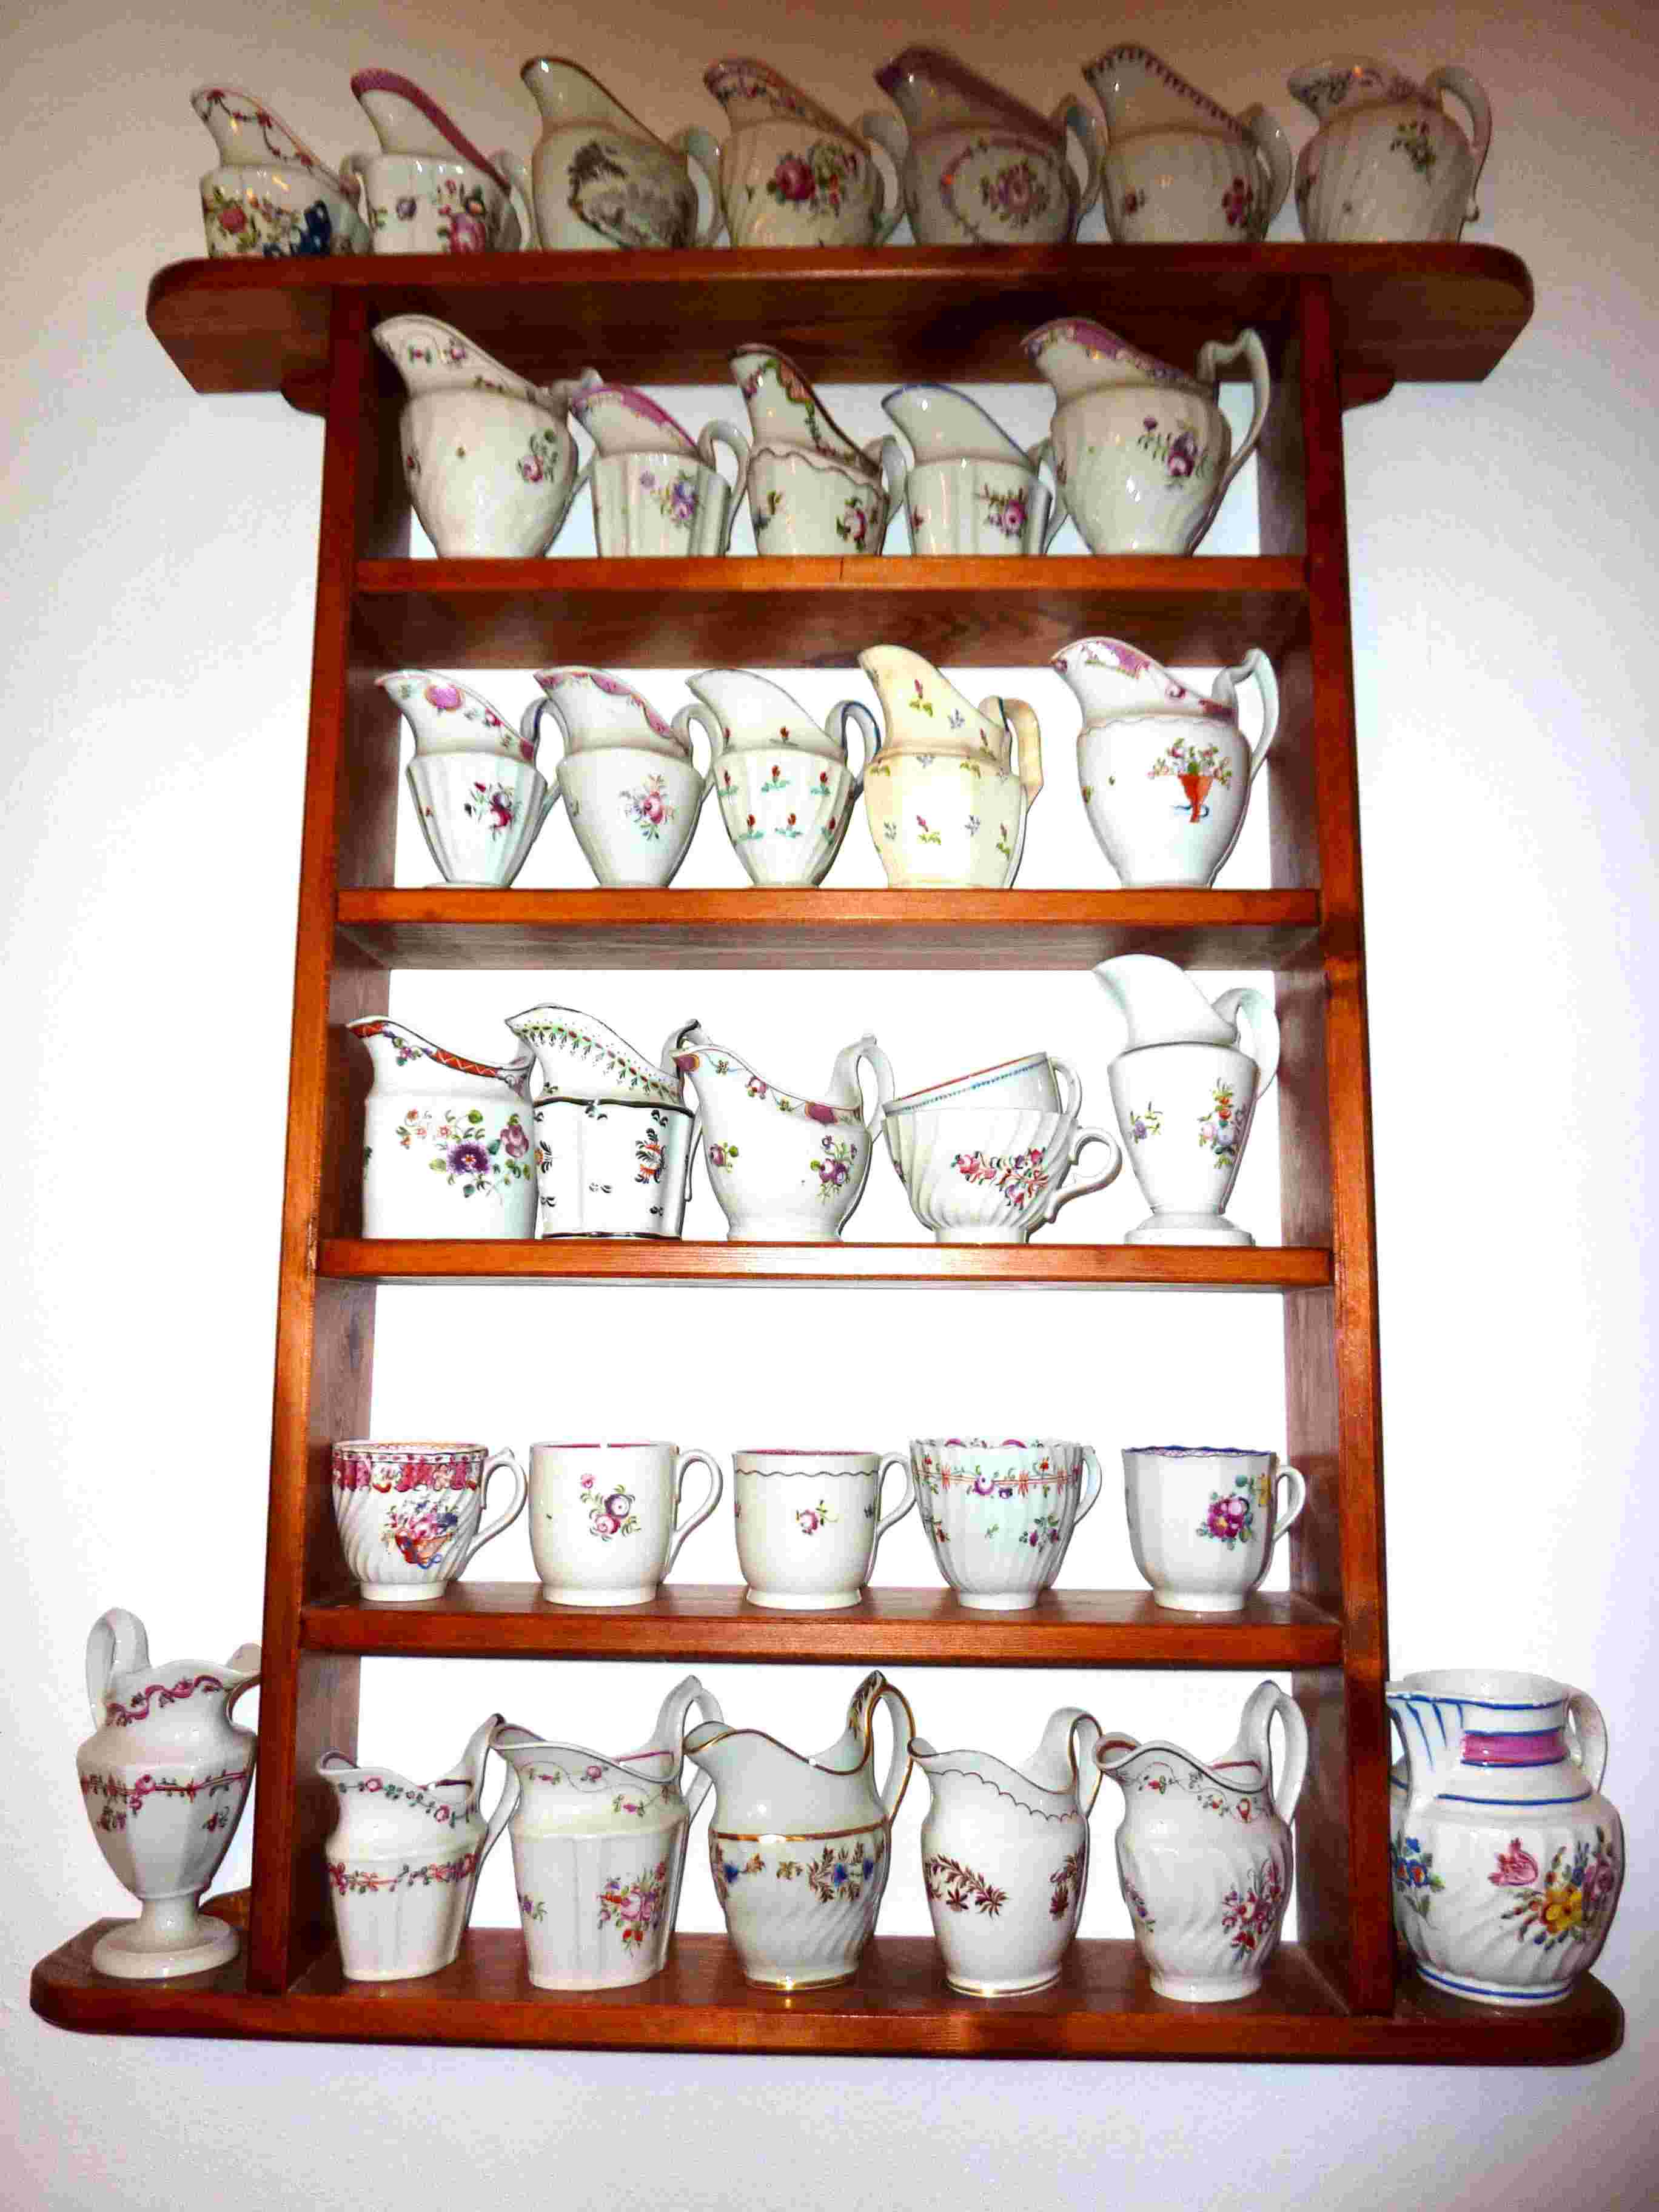 Part of the collection of milk jugs